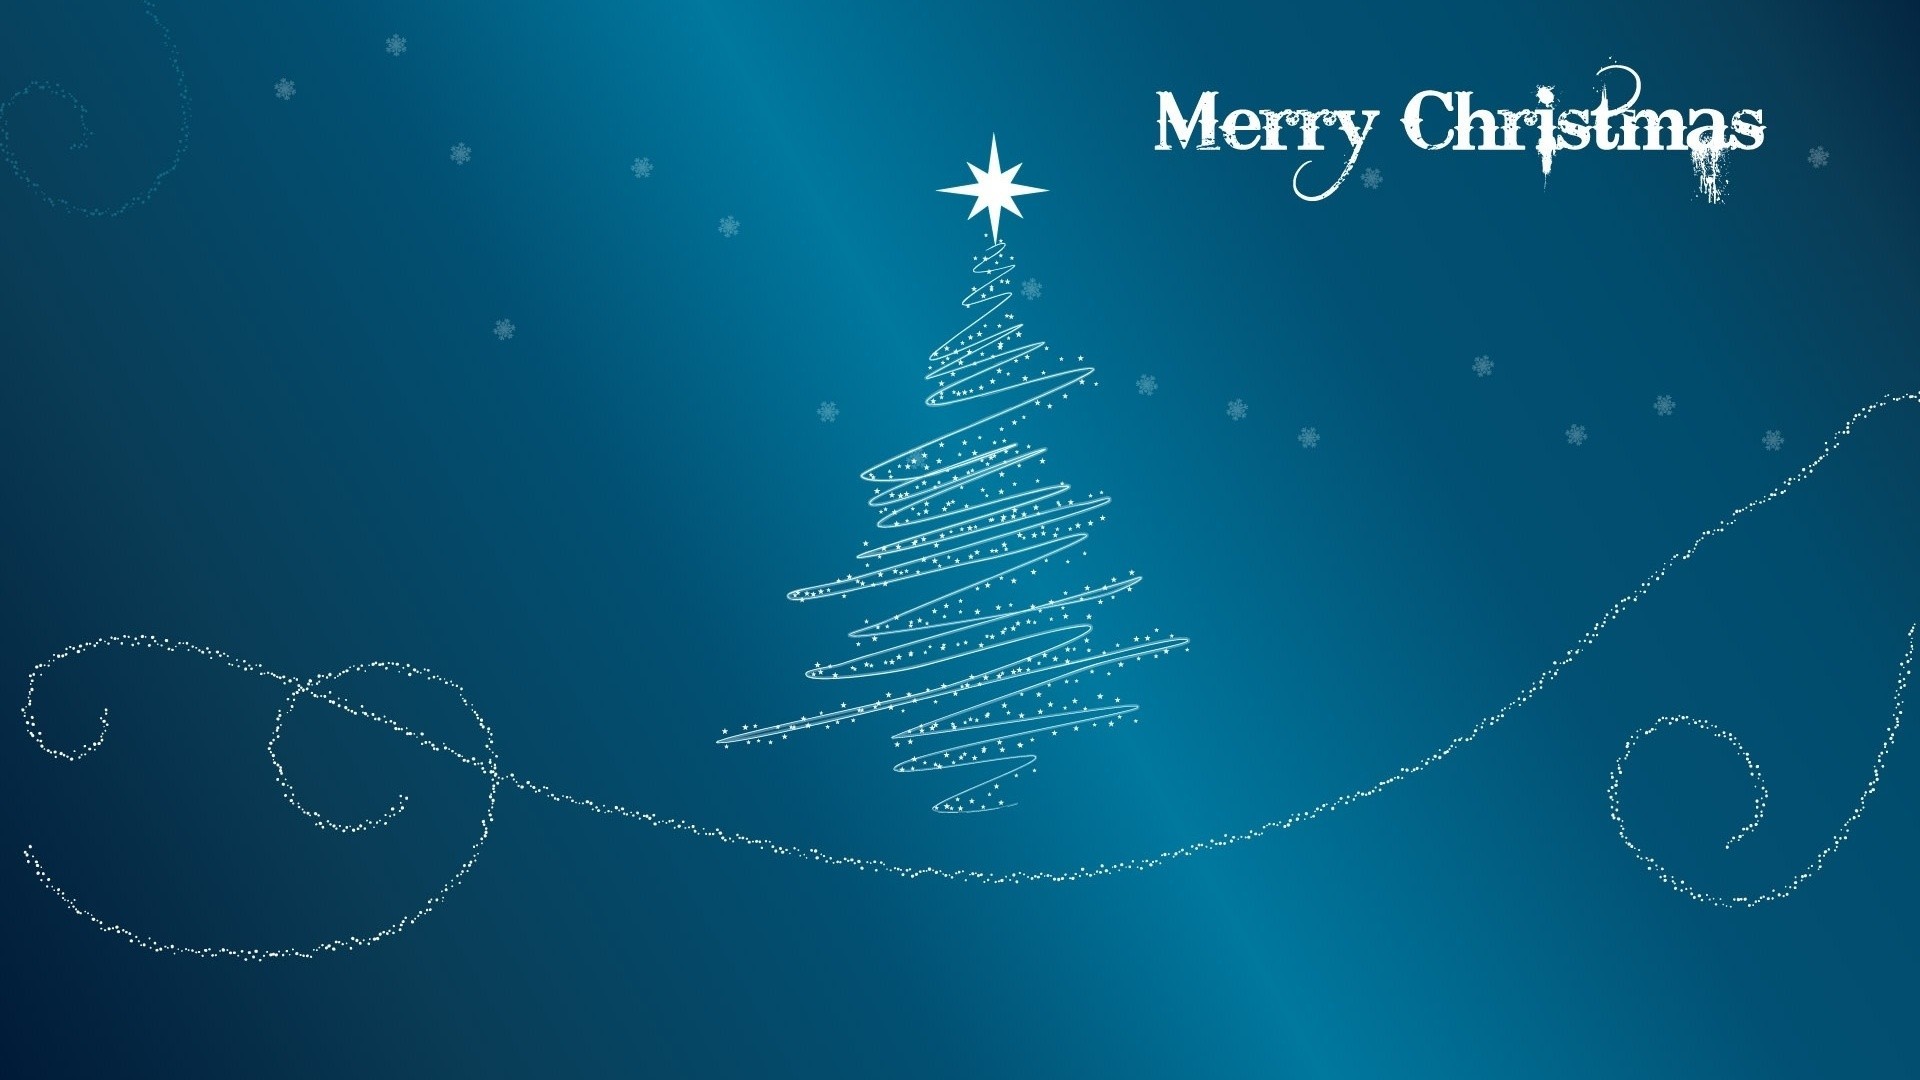 General 1920x1080 Christmas artwork blue background holiday